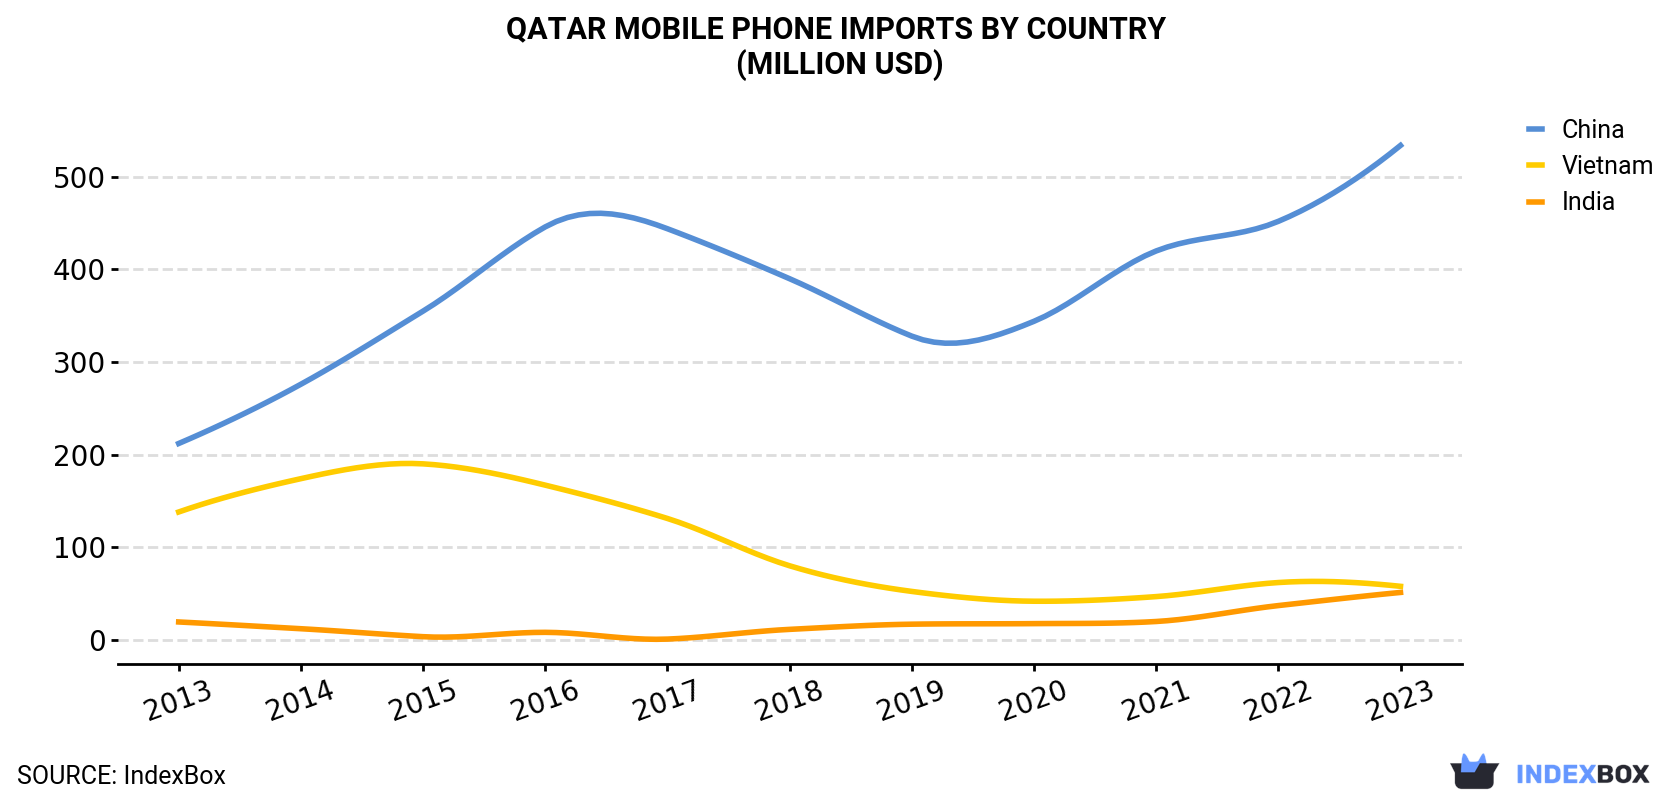 Qatar Mobile Phone Imports By Country (Million USD)